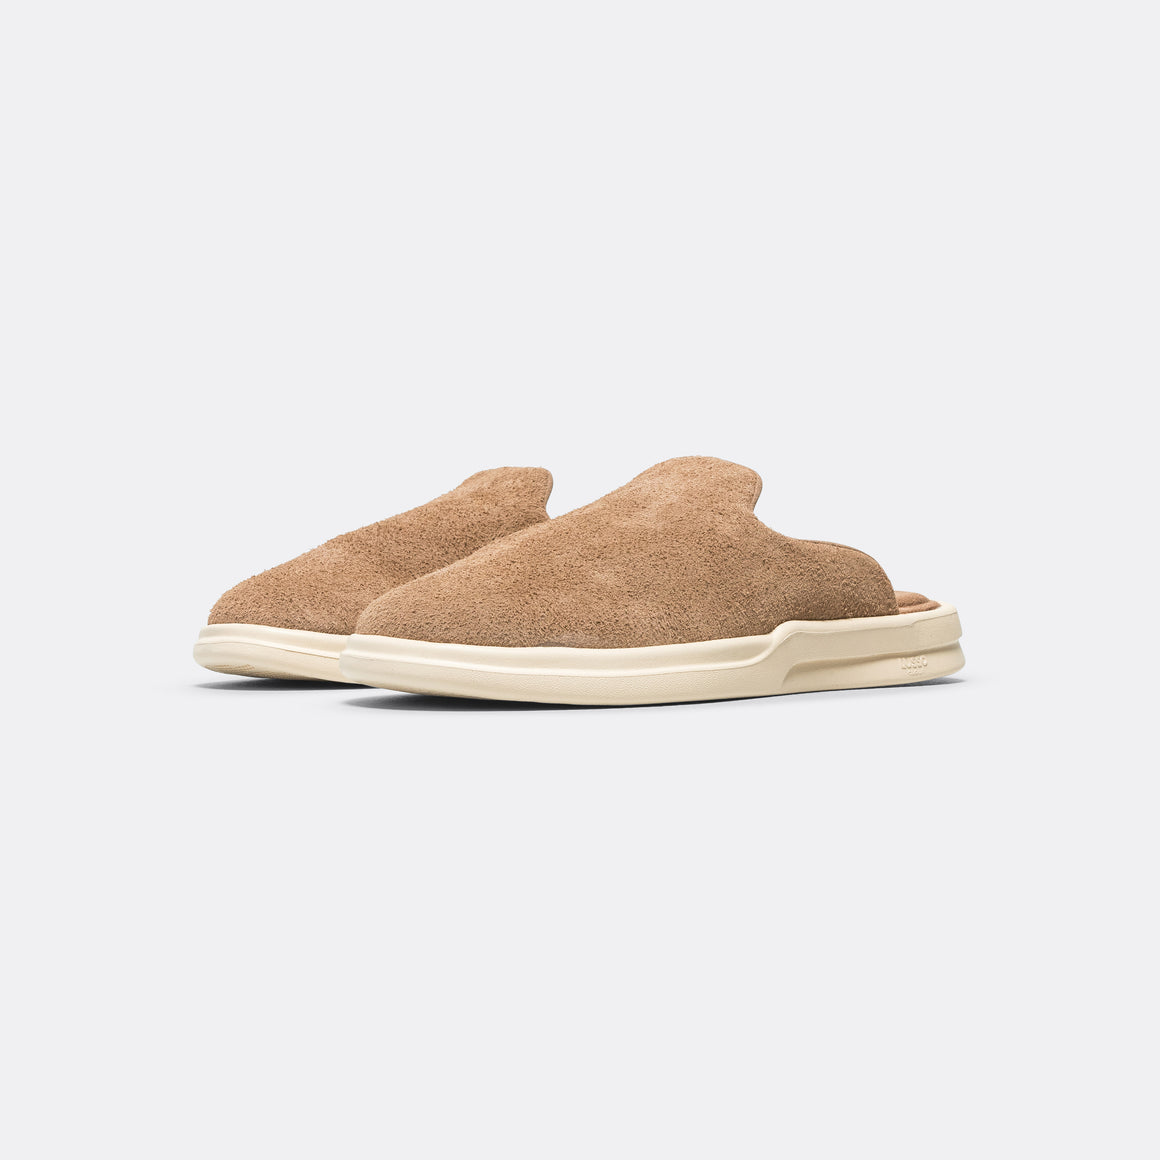 Lusso Cloud - Pelli Hairy Suede - Chestnut/Shortbread - UP THERE